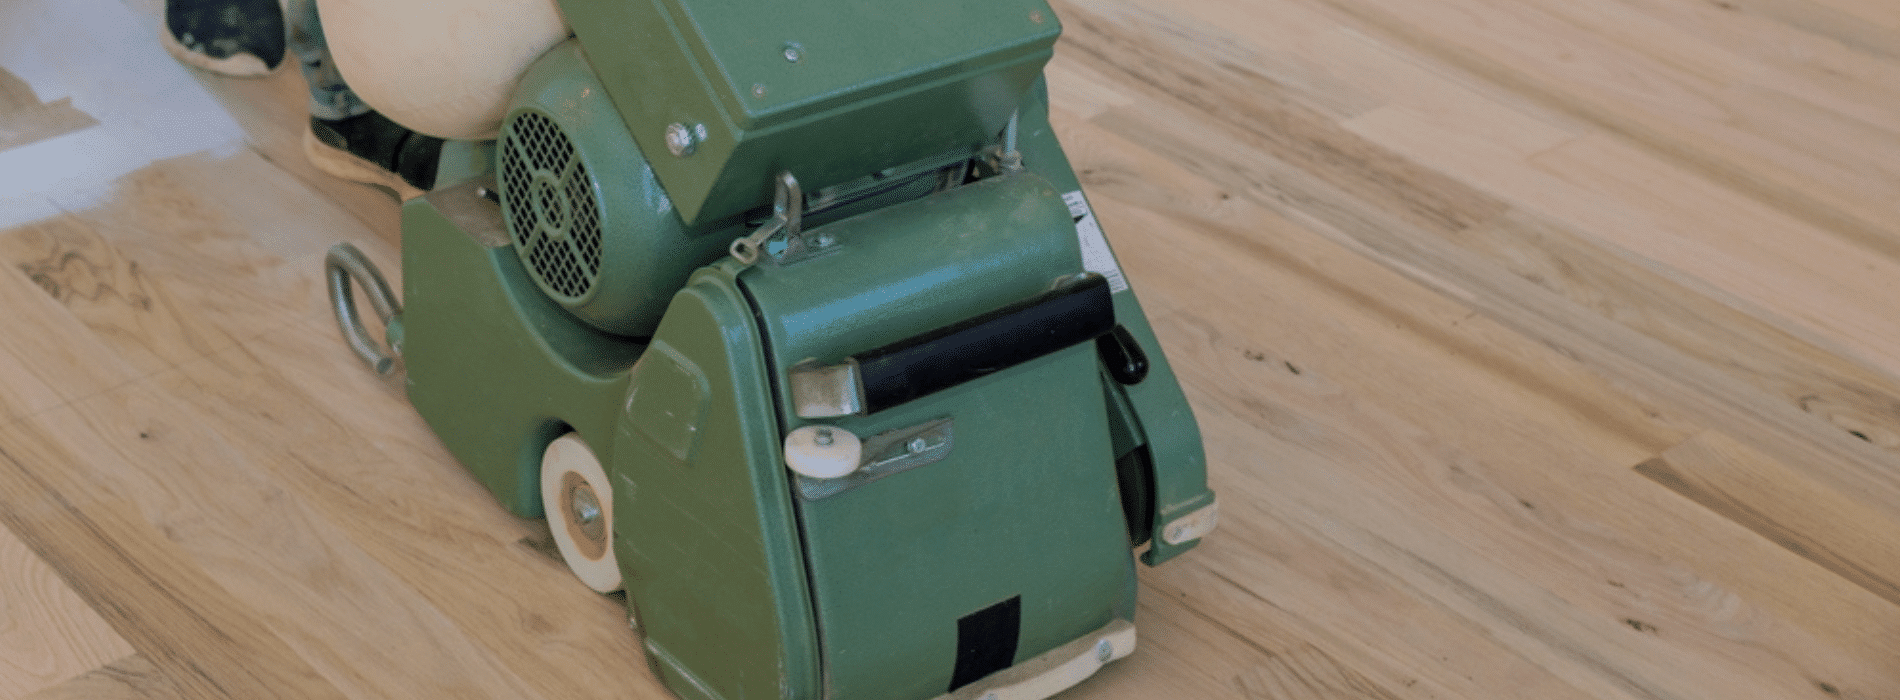 In Beckton, E6, Our Mr Sander® are using a Bona Scorpion drum sander, measuring 200mm, with a powerful 1.5 kW motor. It operates on 240V voltage and 50Hz frequency. To ensure a clean and efficient outcome, we have connected it to a dust extraction system equipped with a HEPA filter.